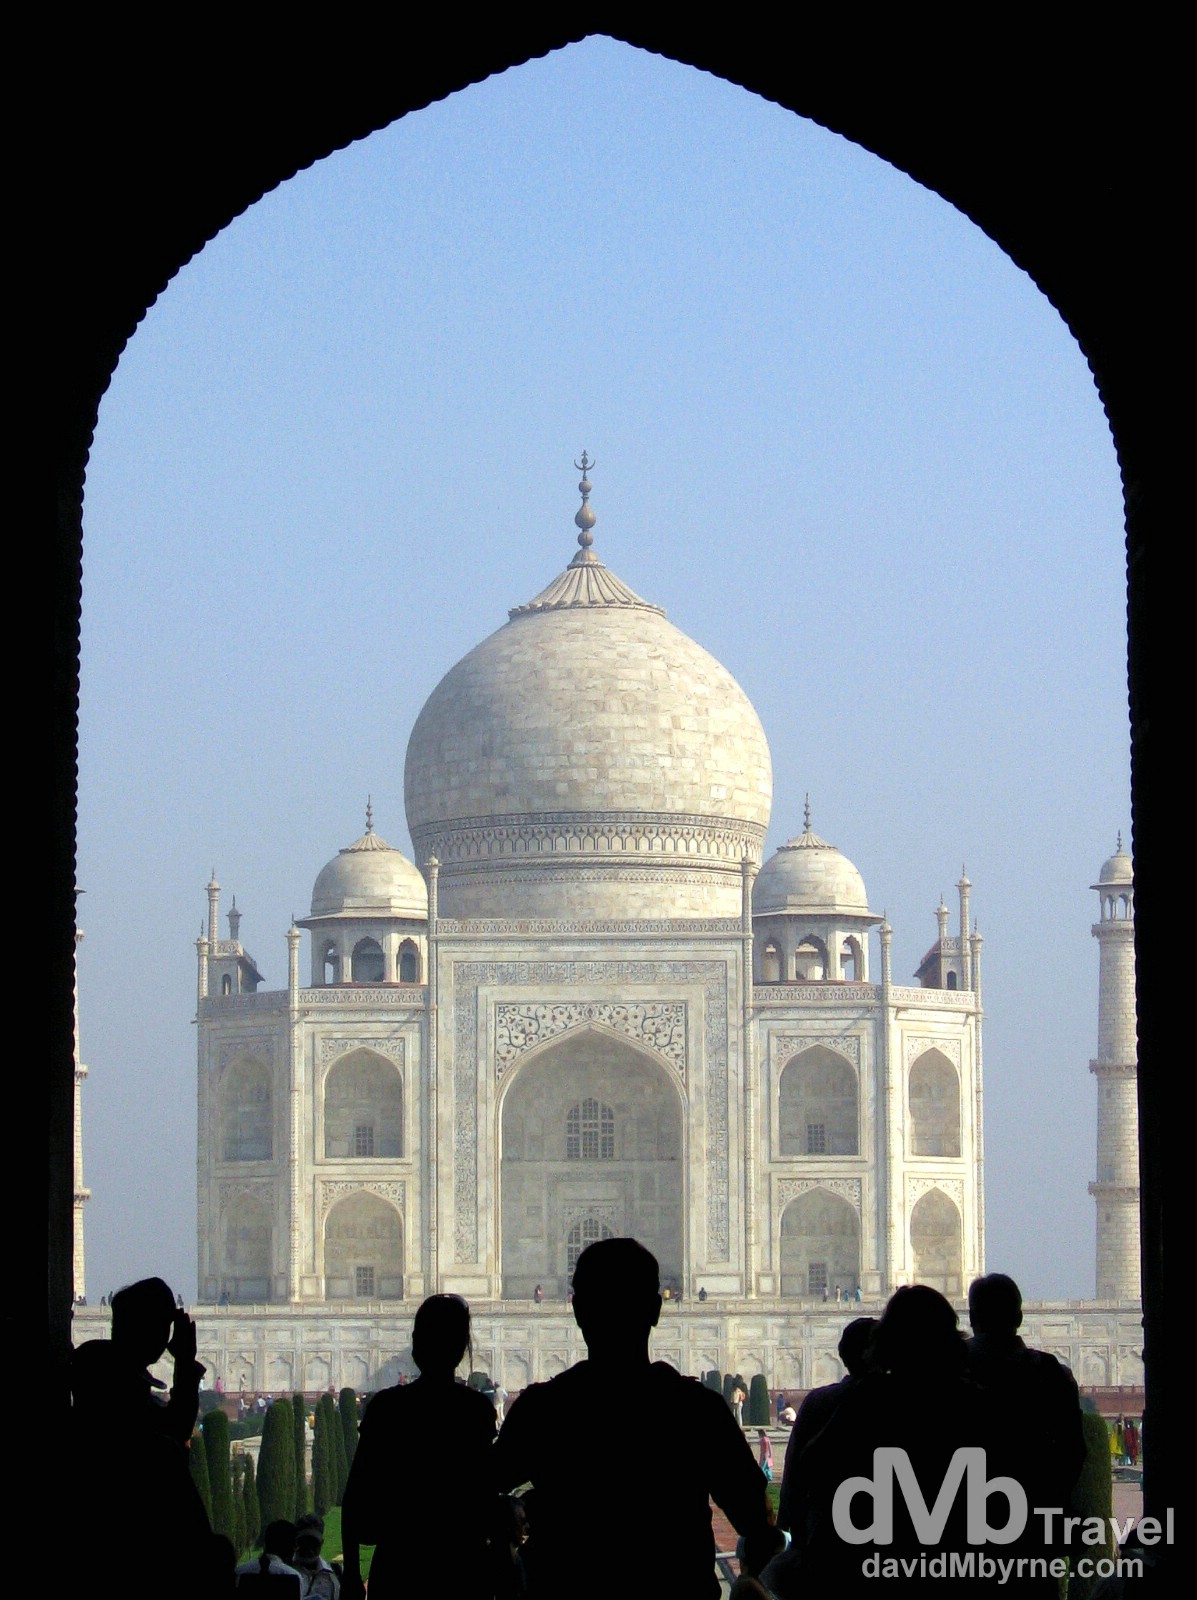 The Taj Mahal as seen from under the arch of the South Gate. Agra, Uttar Pradesh, India. March 25, 2008.